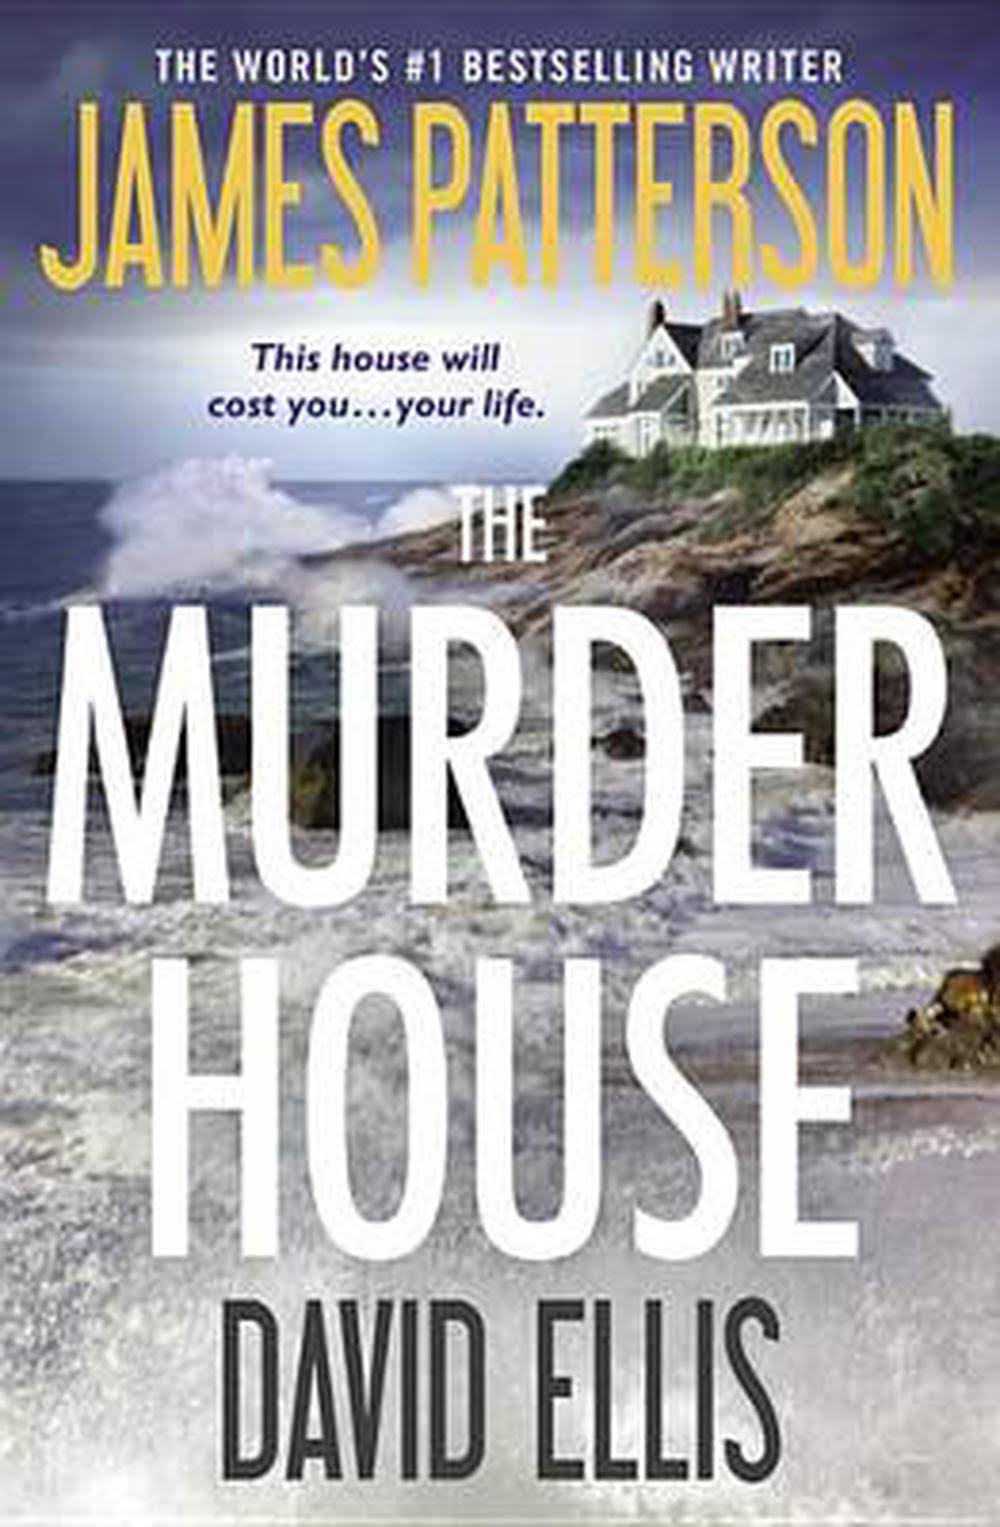 The Murder House - James Patterson and David Ellis